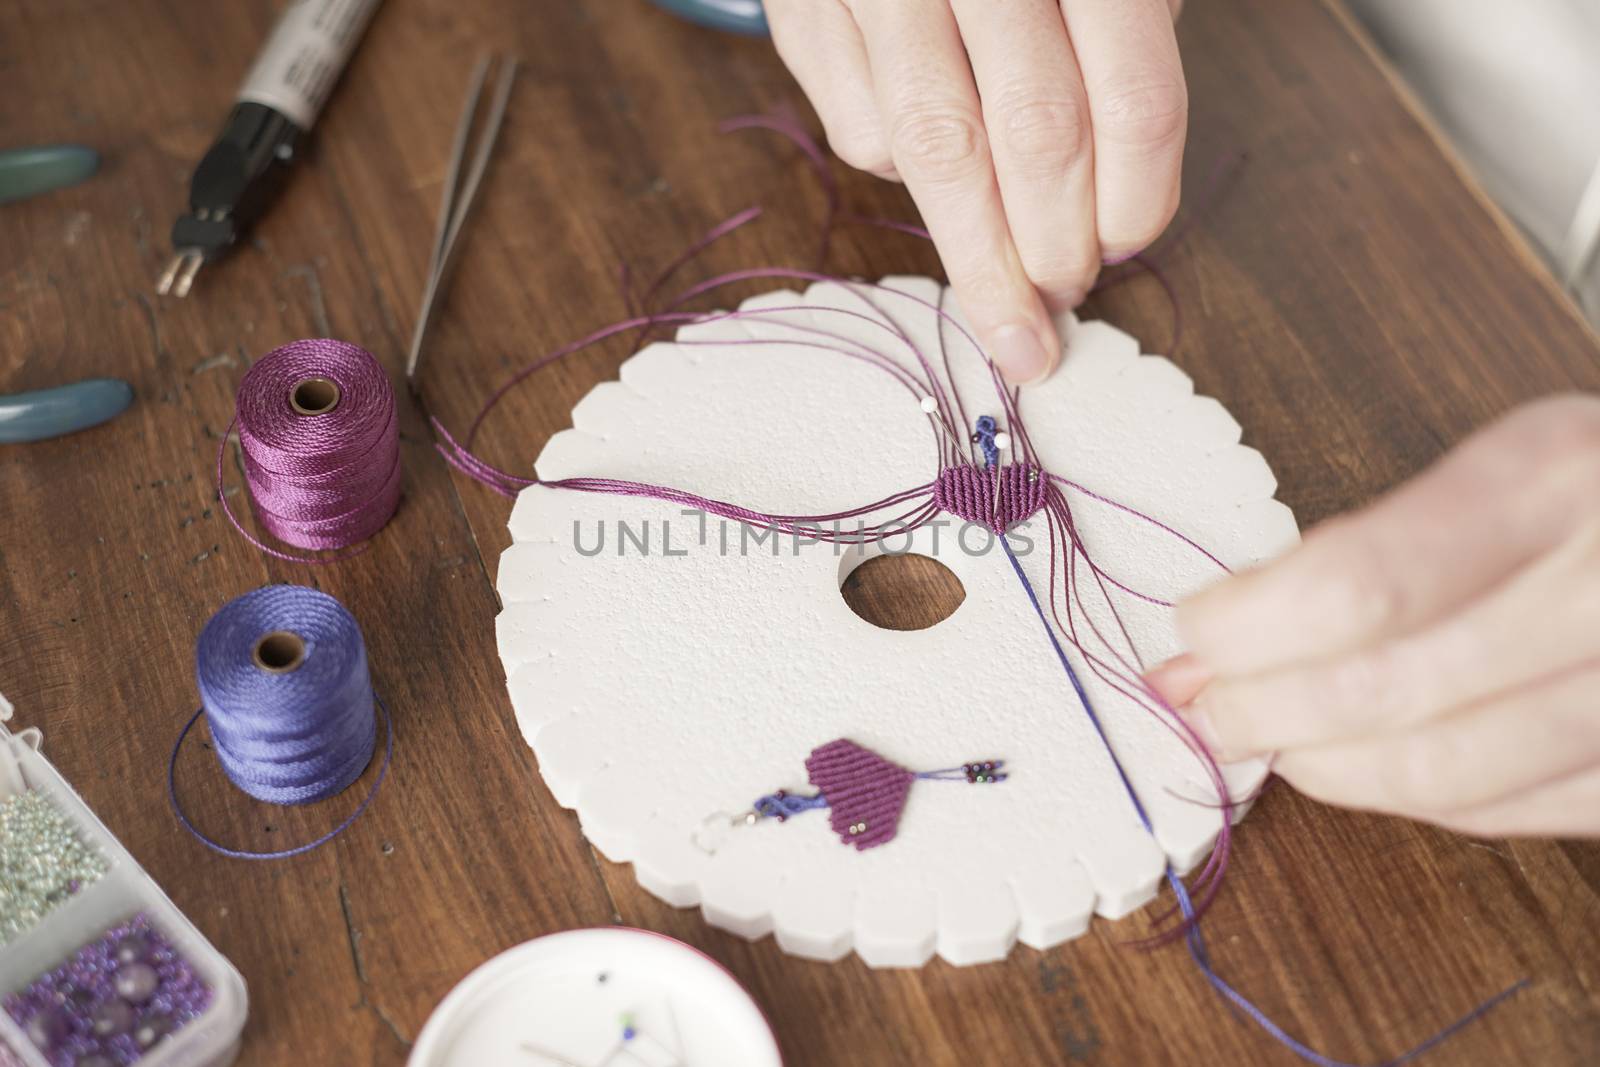 Lifestyle concept, work from home to reinvent your life: close-up of woman hands making macrame knots the fuchsia thread creating an earring on kumihimo tools on wooden table by robbyfontanesi